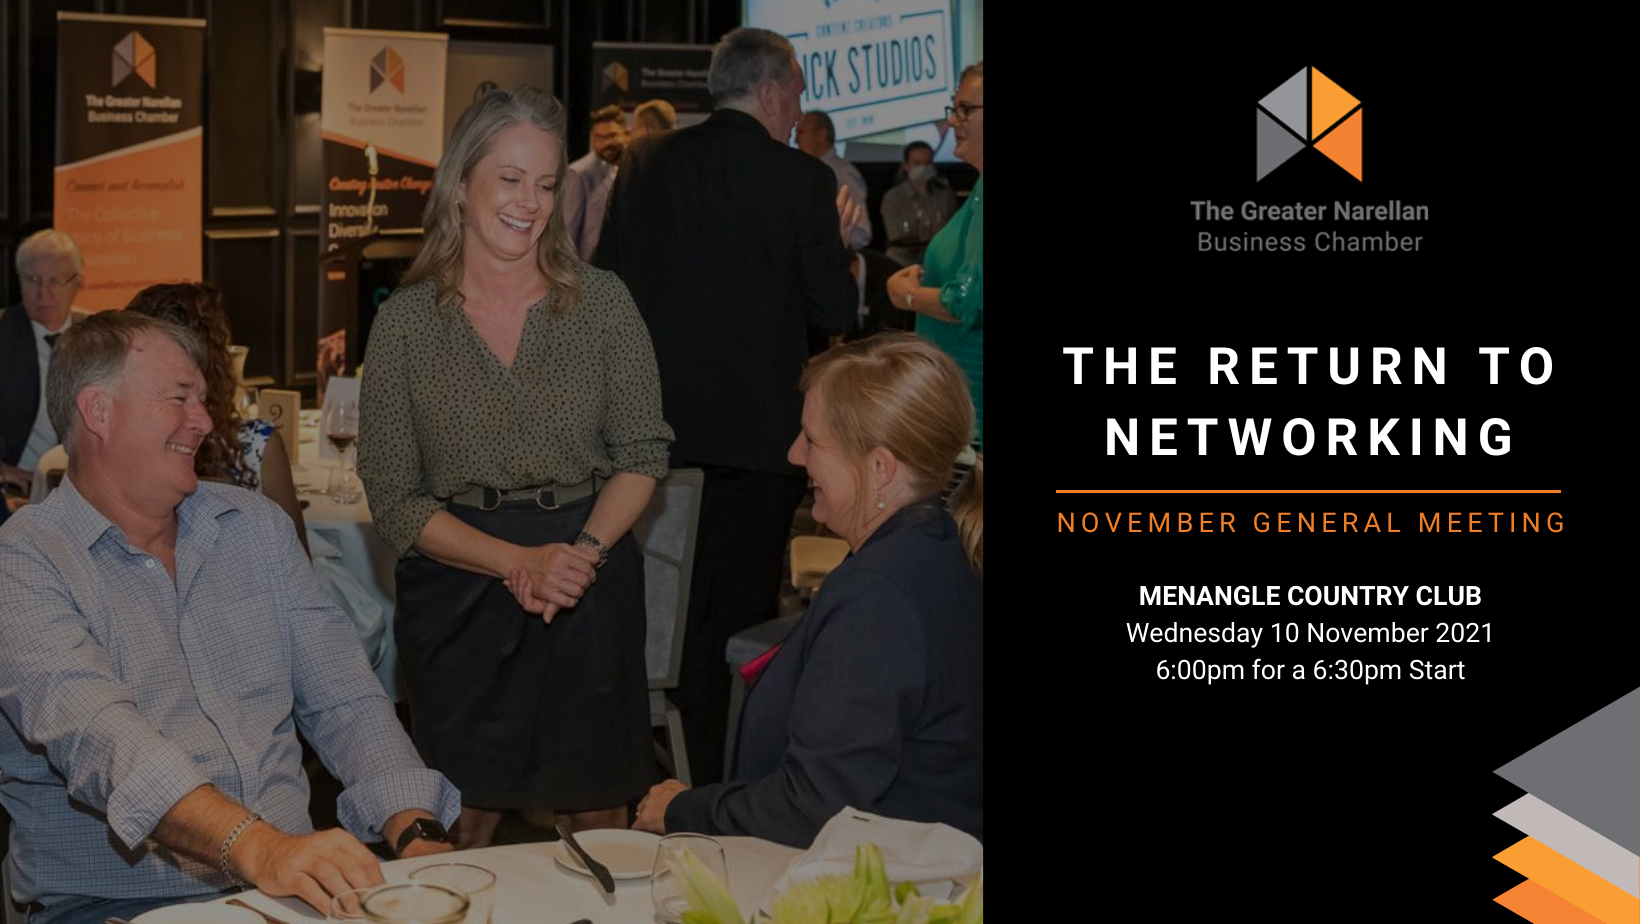 The Return to Networking November 2021 General Meeting